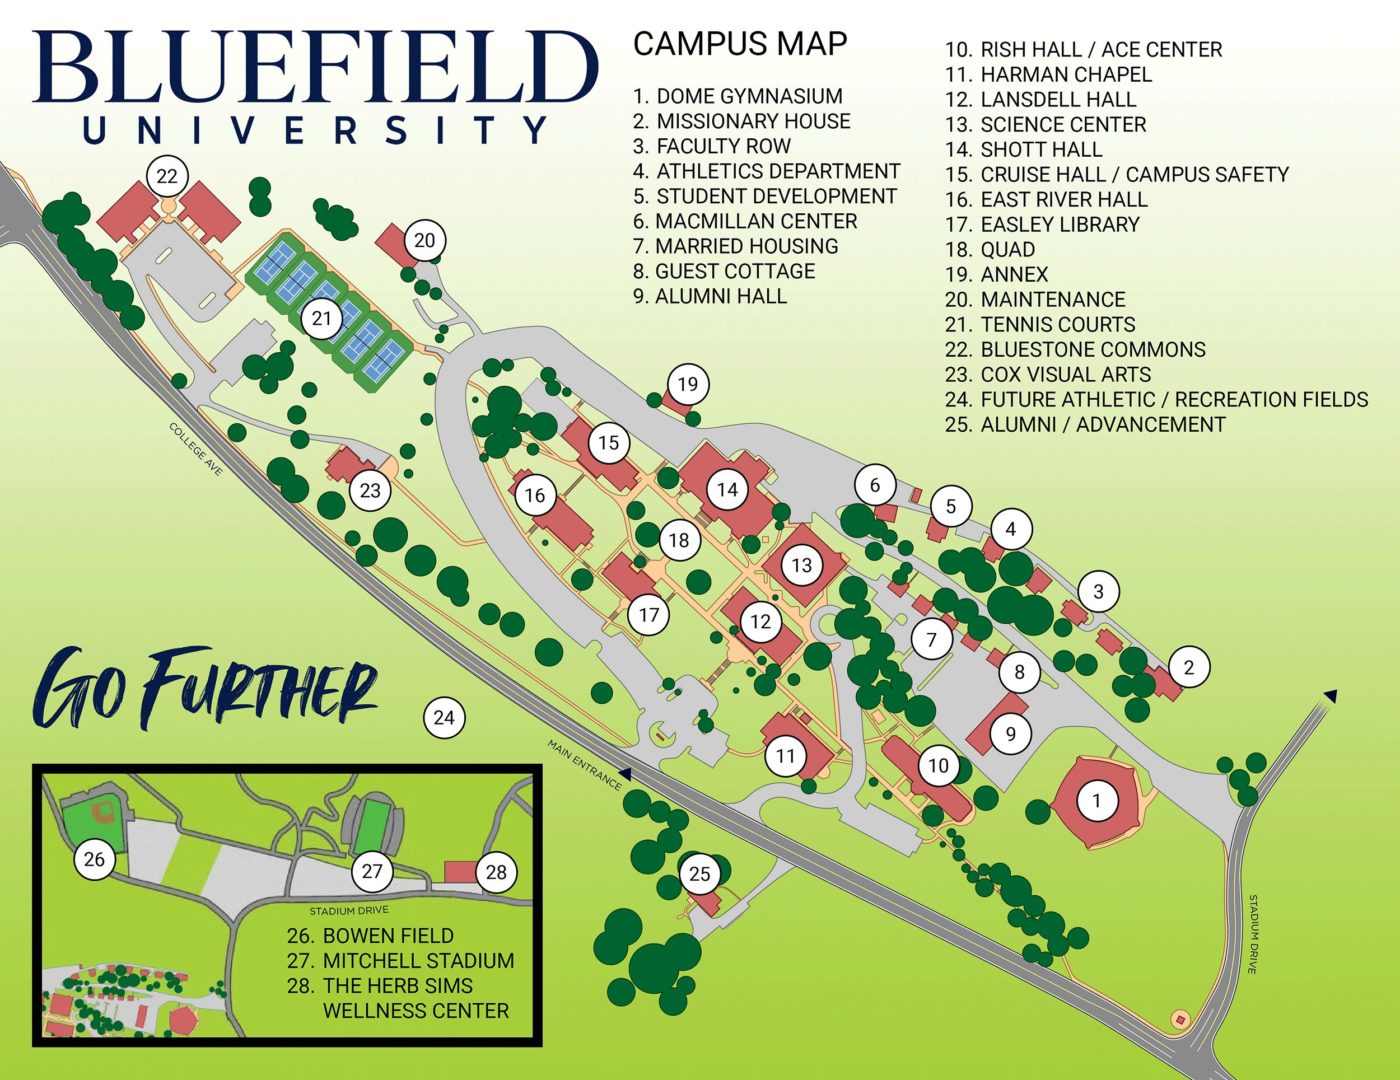 Bluefield University campus map. For more information on navigating campus, please reach out to campus safety. Phone: 304.887.1795.